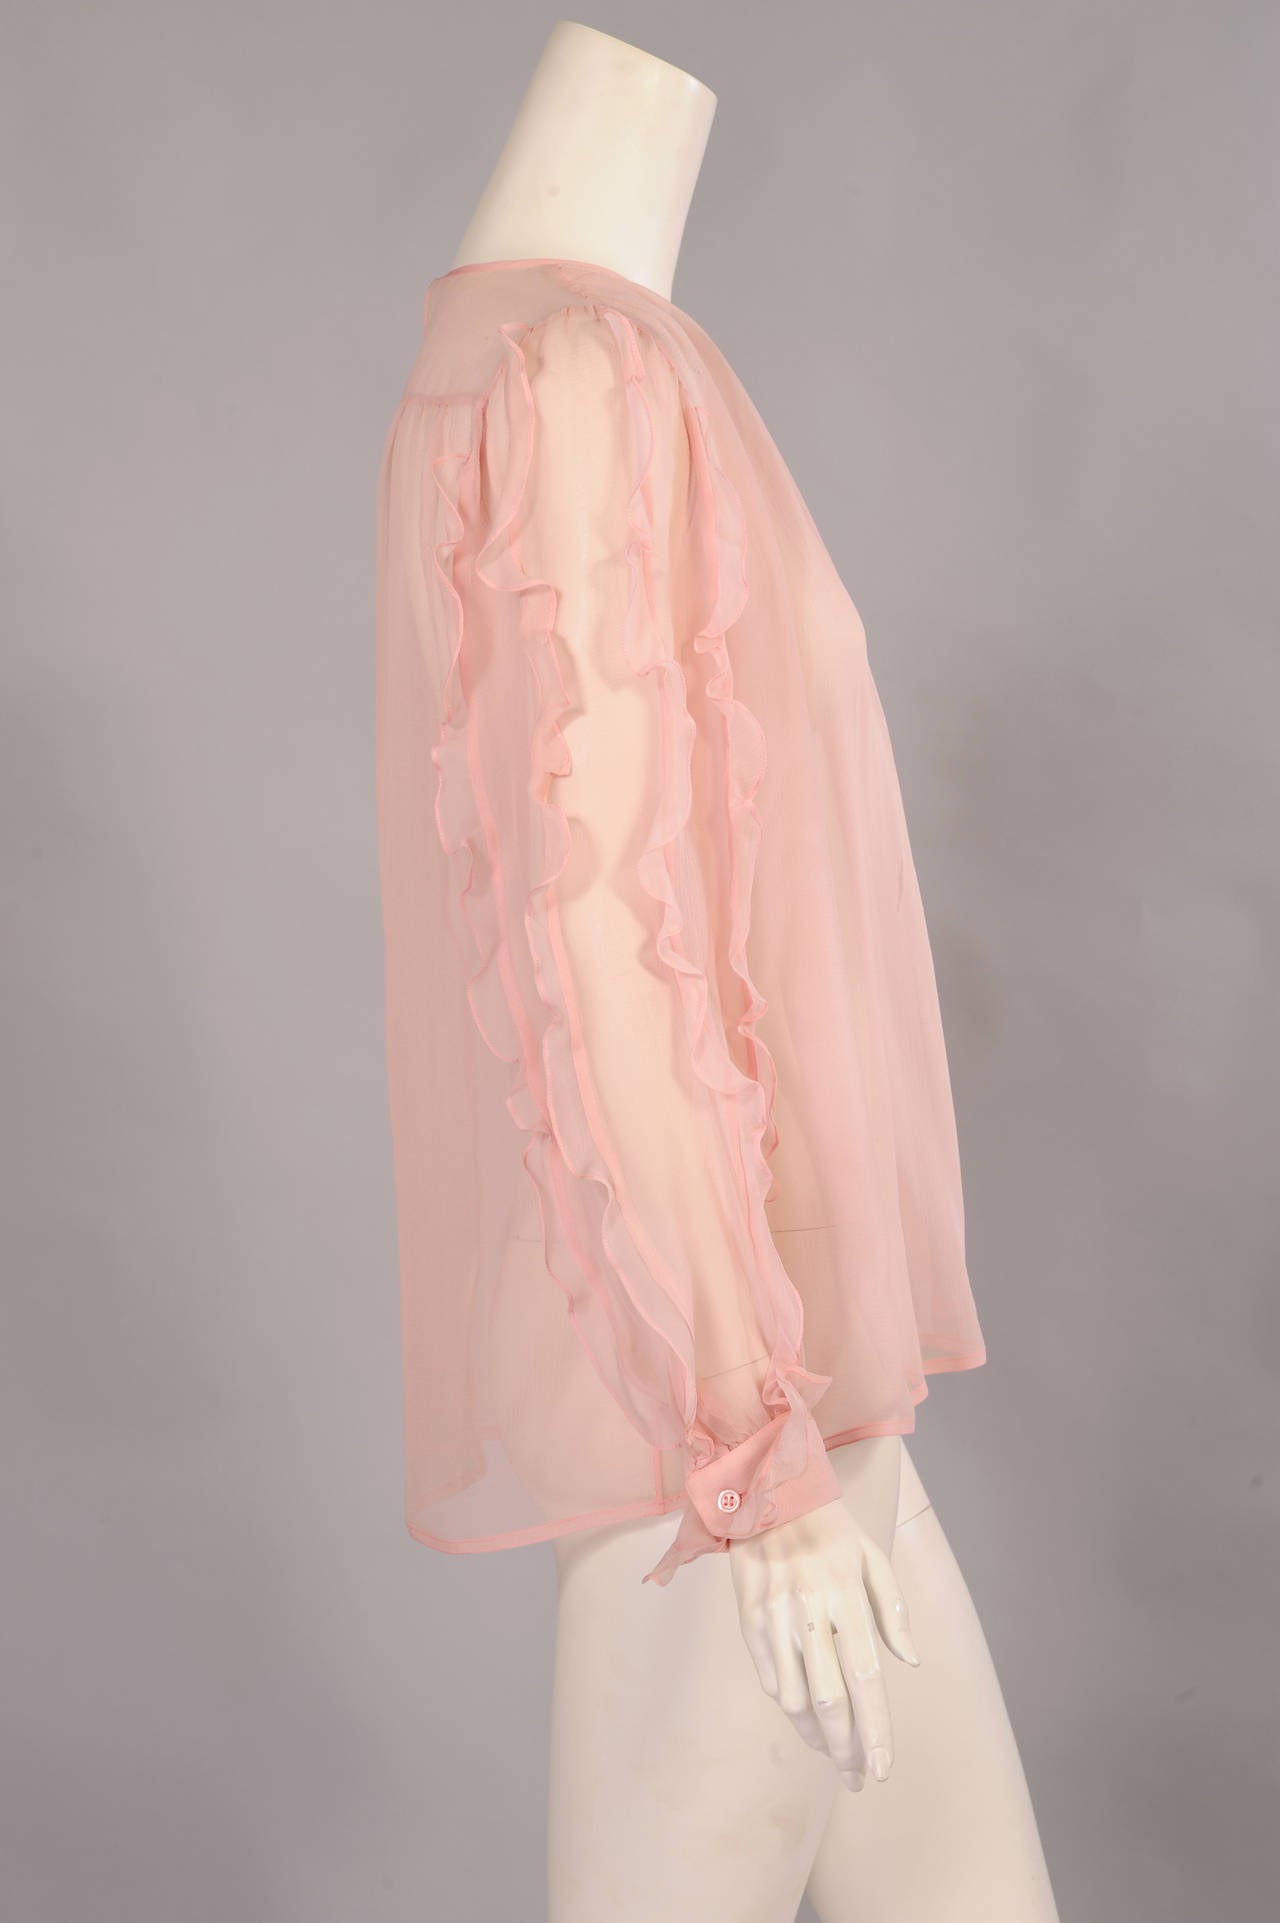 Pink silk georgette is embellished with rows of ruffles running the length of the sleeves. The French cuffs are also edged with ruffles. The blouse has a single button at the back above a deep opening. The blouse is in excellent